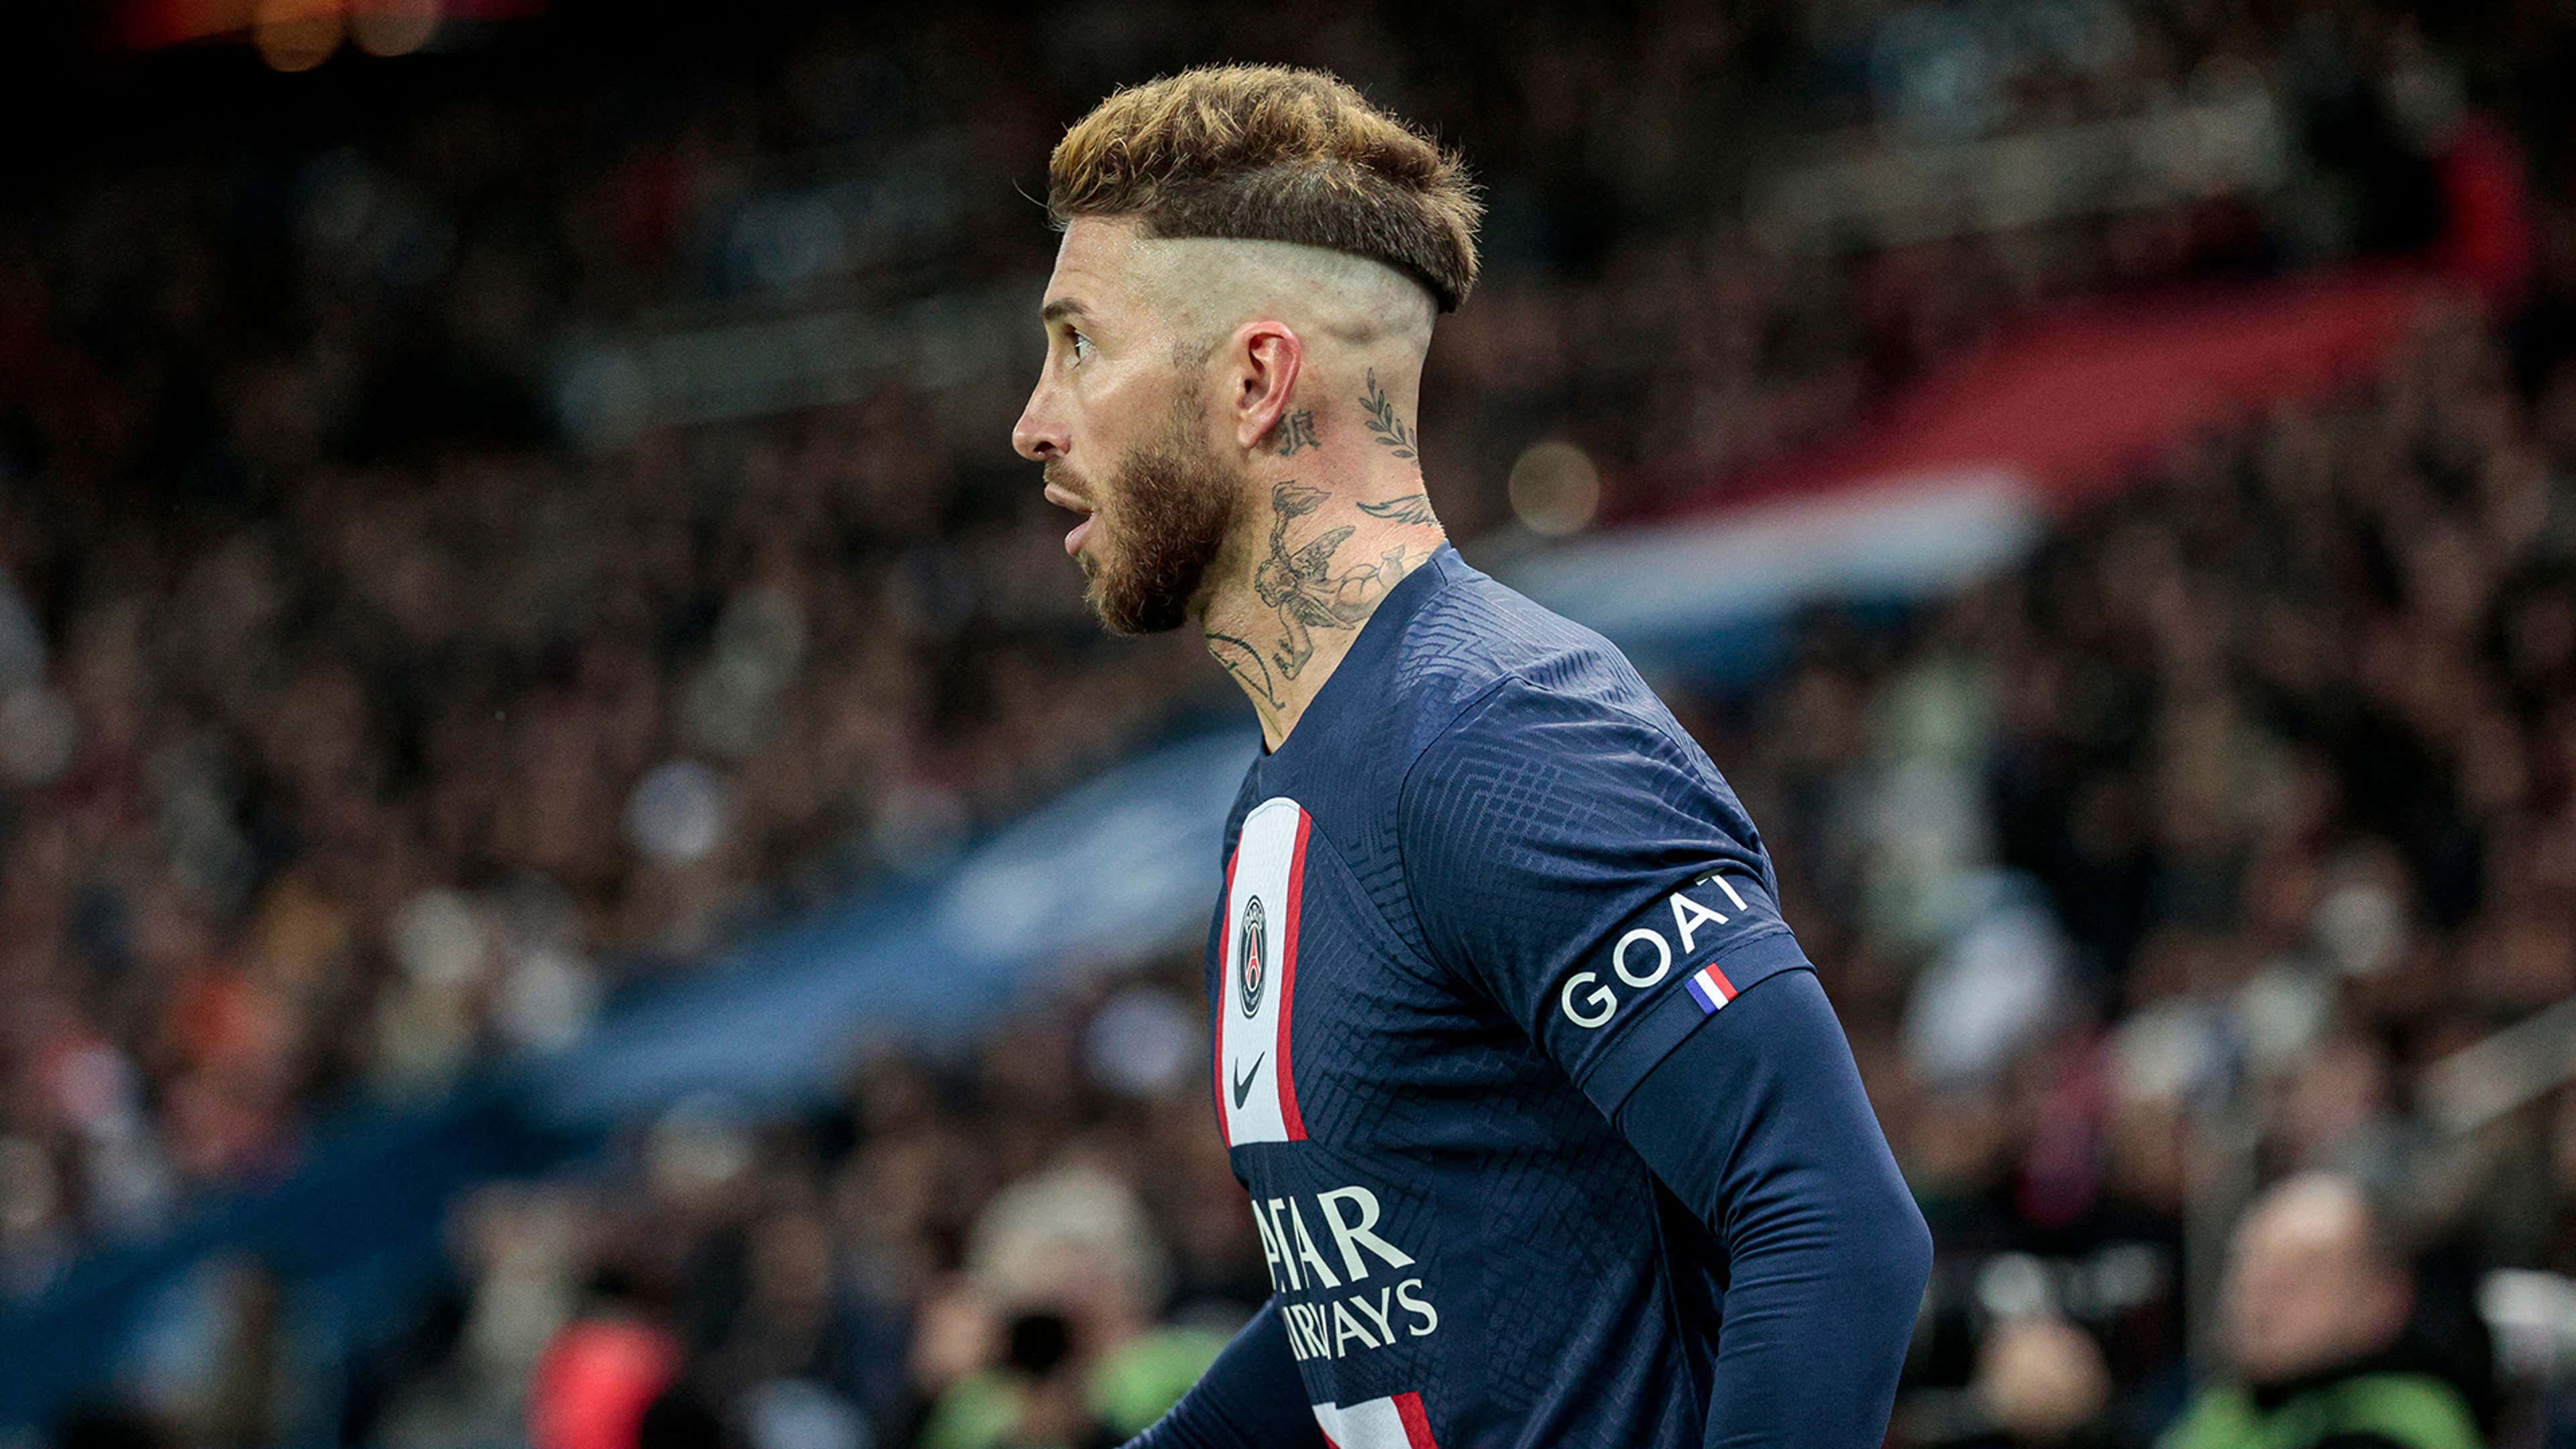 Messi scores and assists in PSG win; Angers finally taste victory